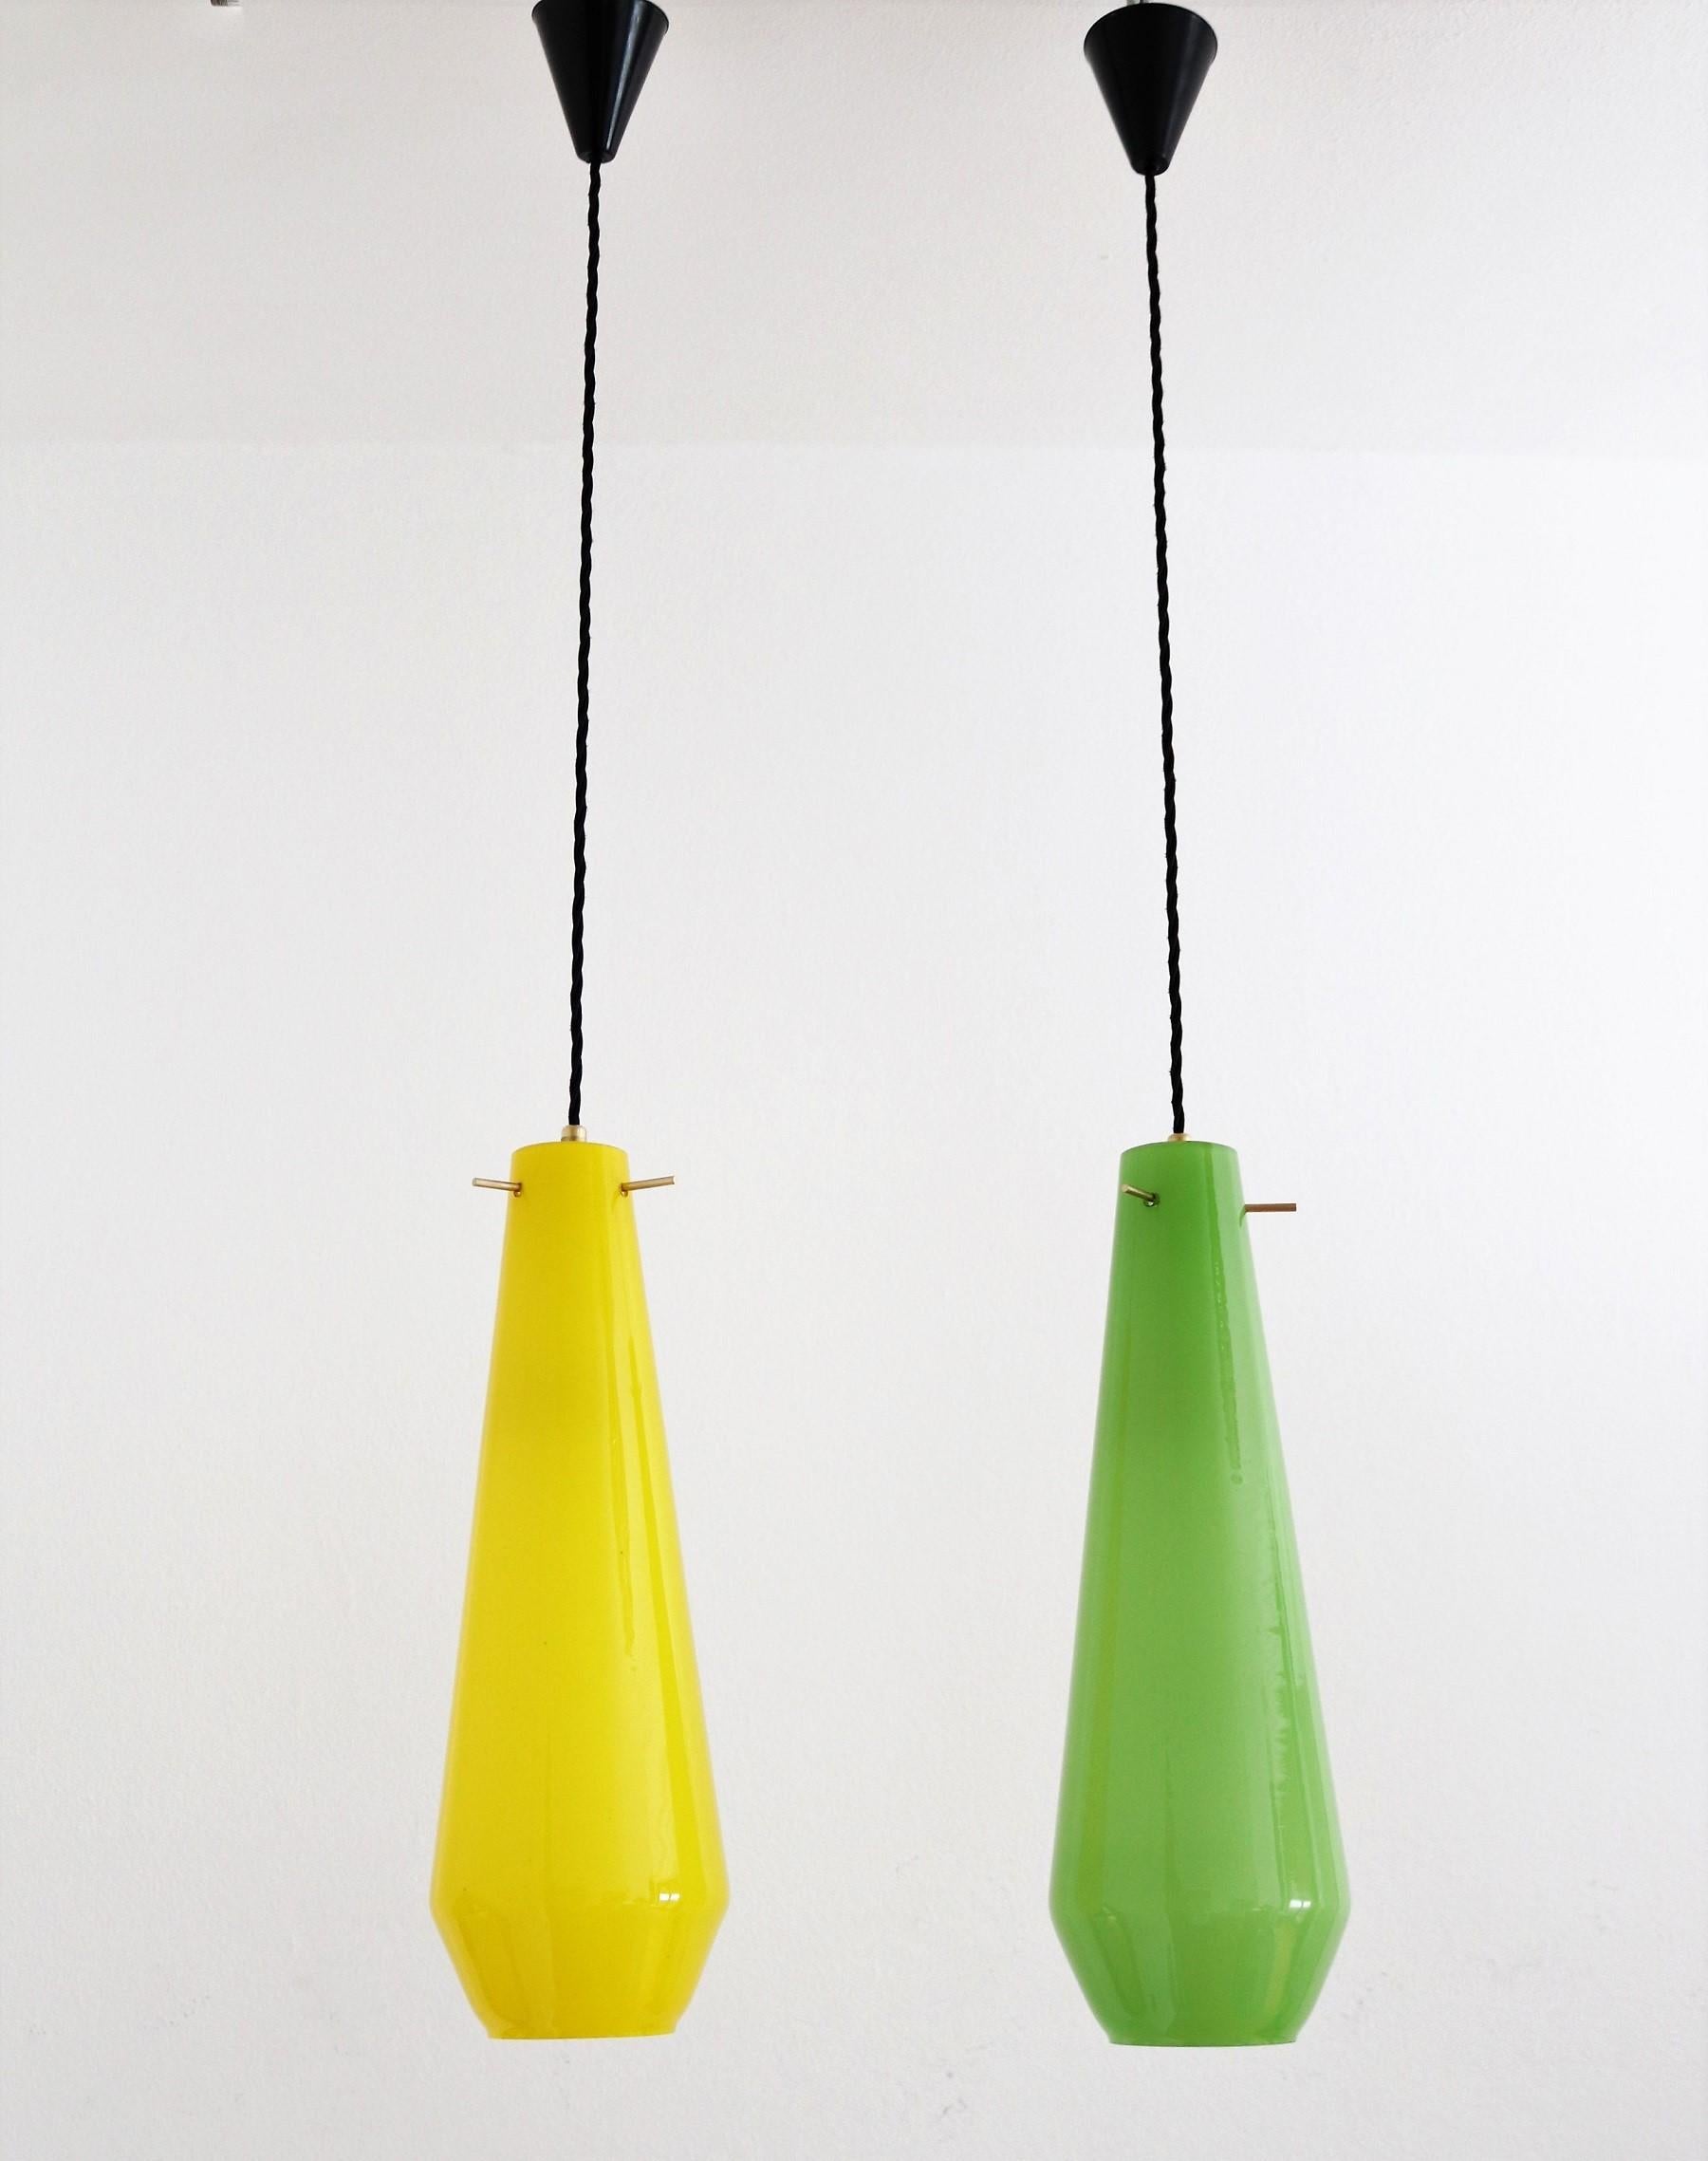 Hand-Crafted Italian Midcentury Murano Glass Pendants in Green and Yellow, 1970s